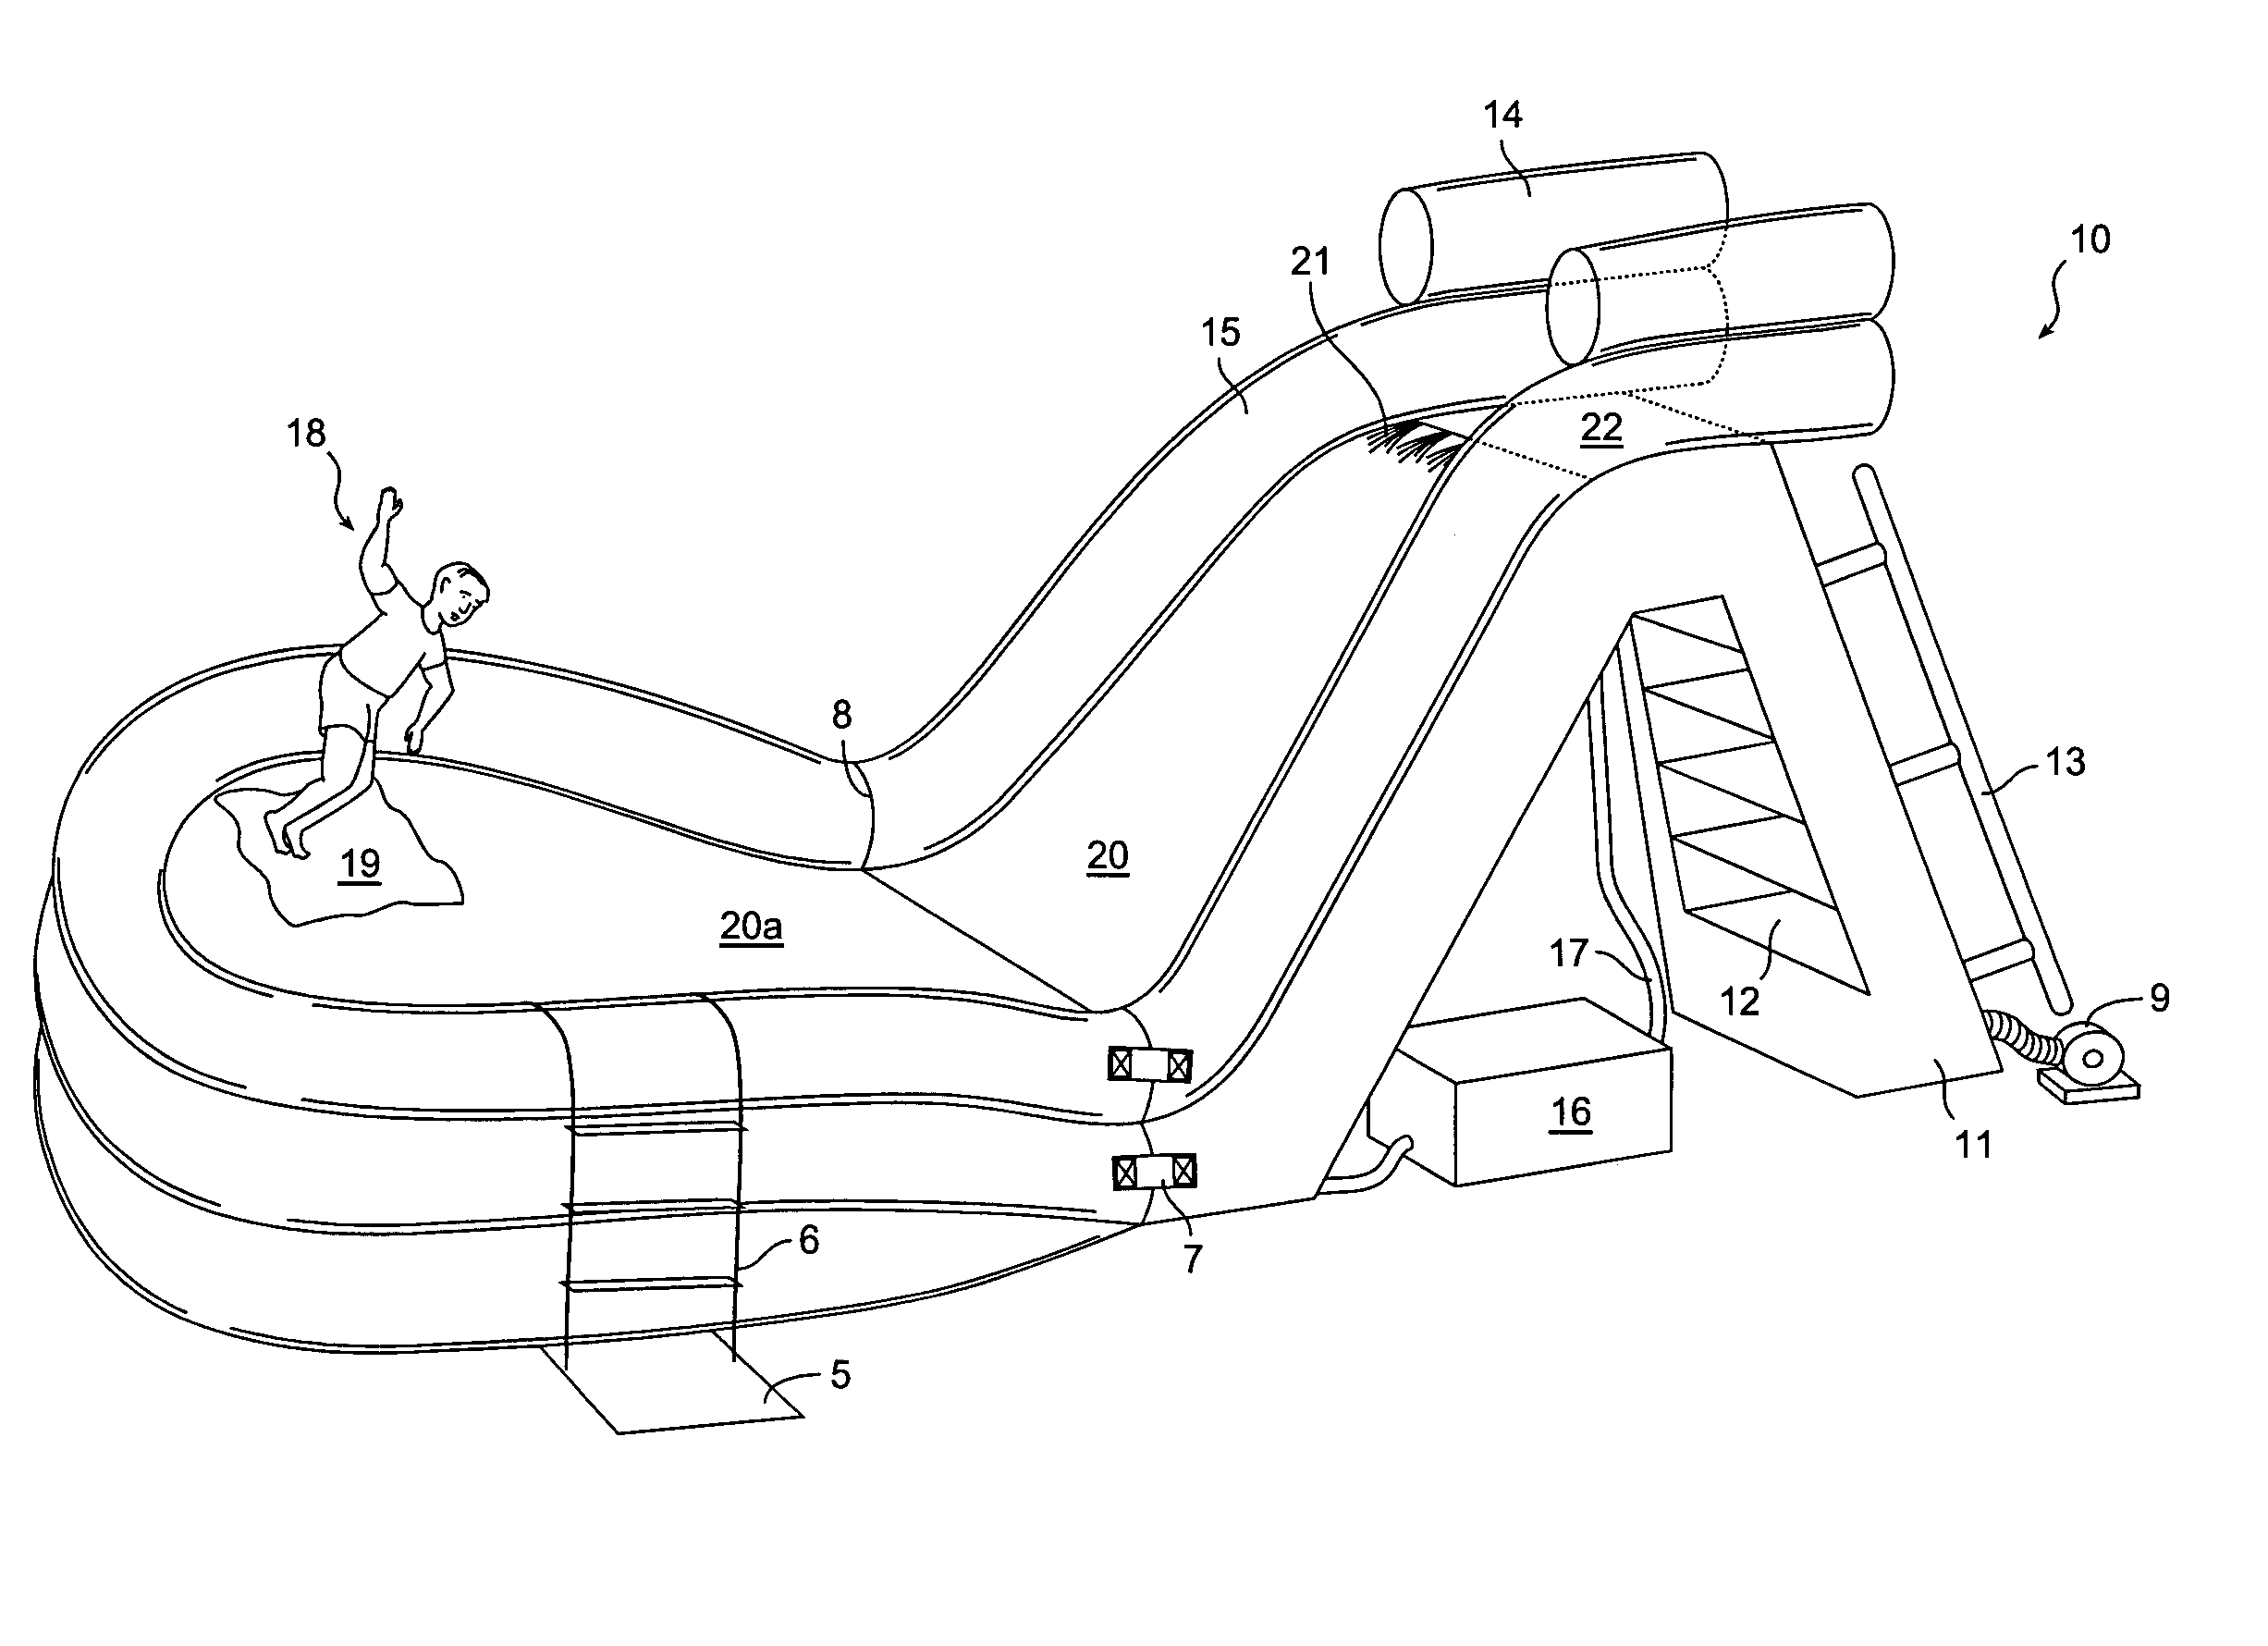 Sliding exercise apparatus and recreational device